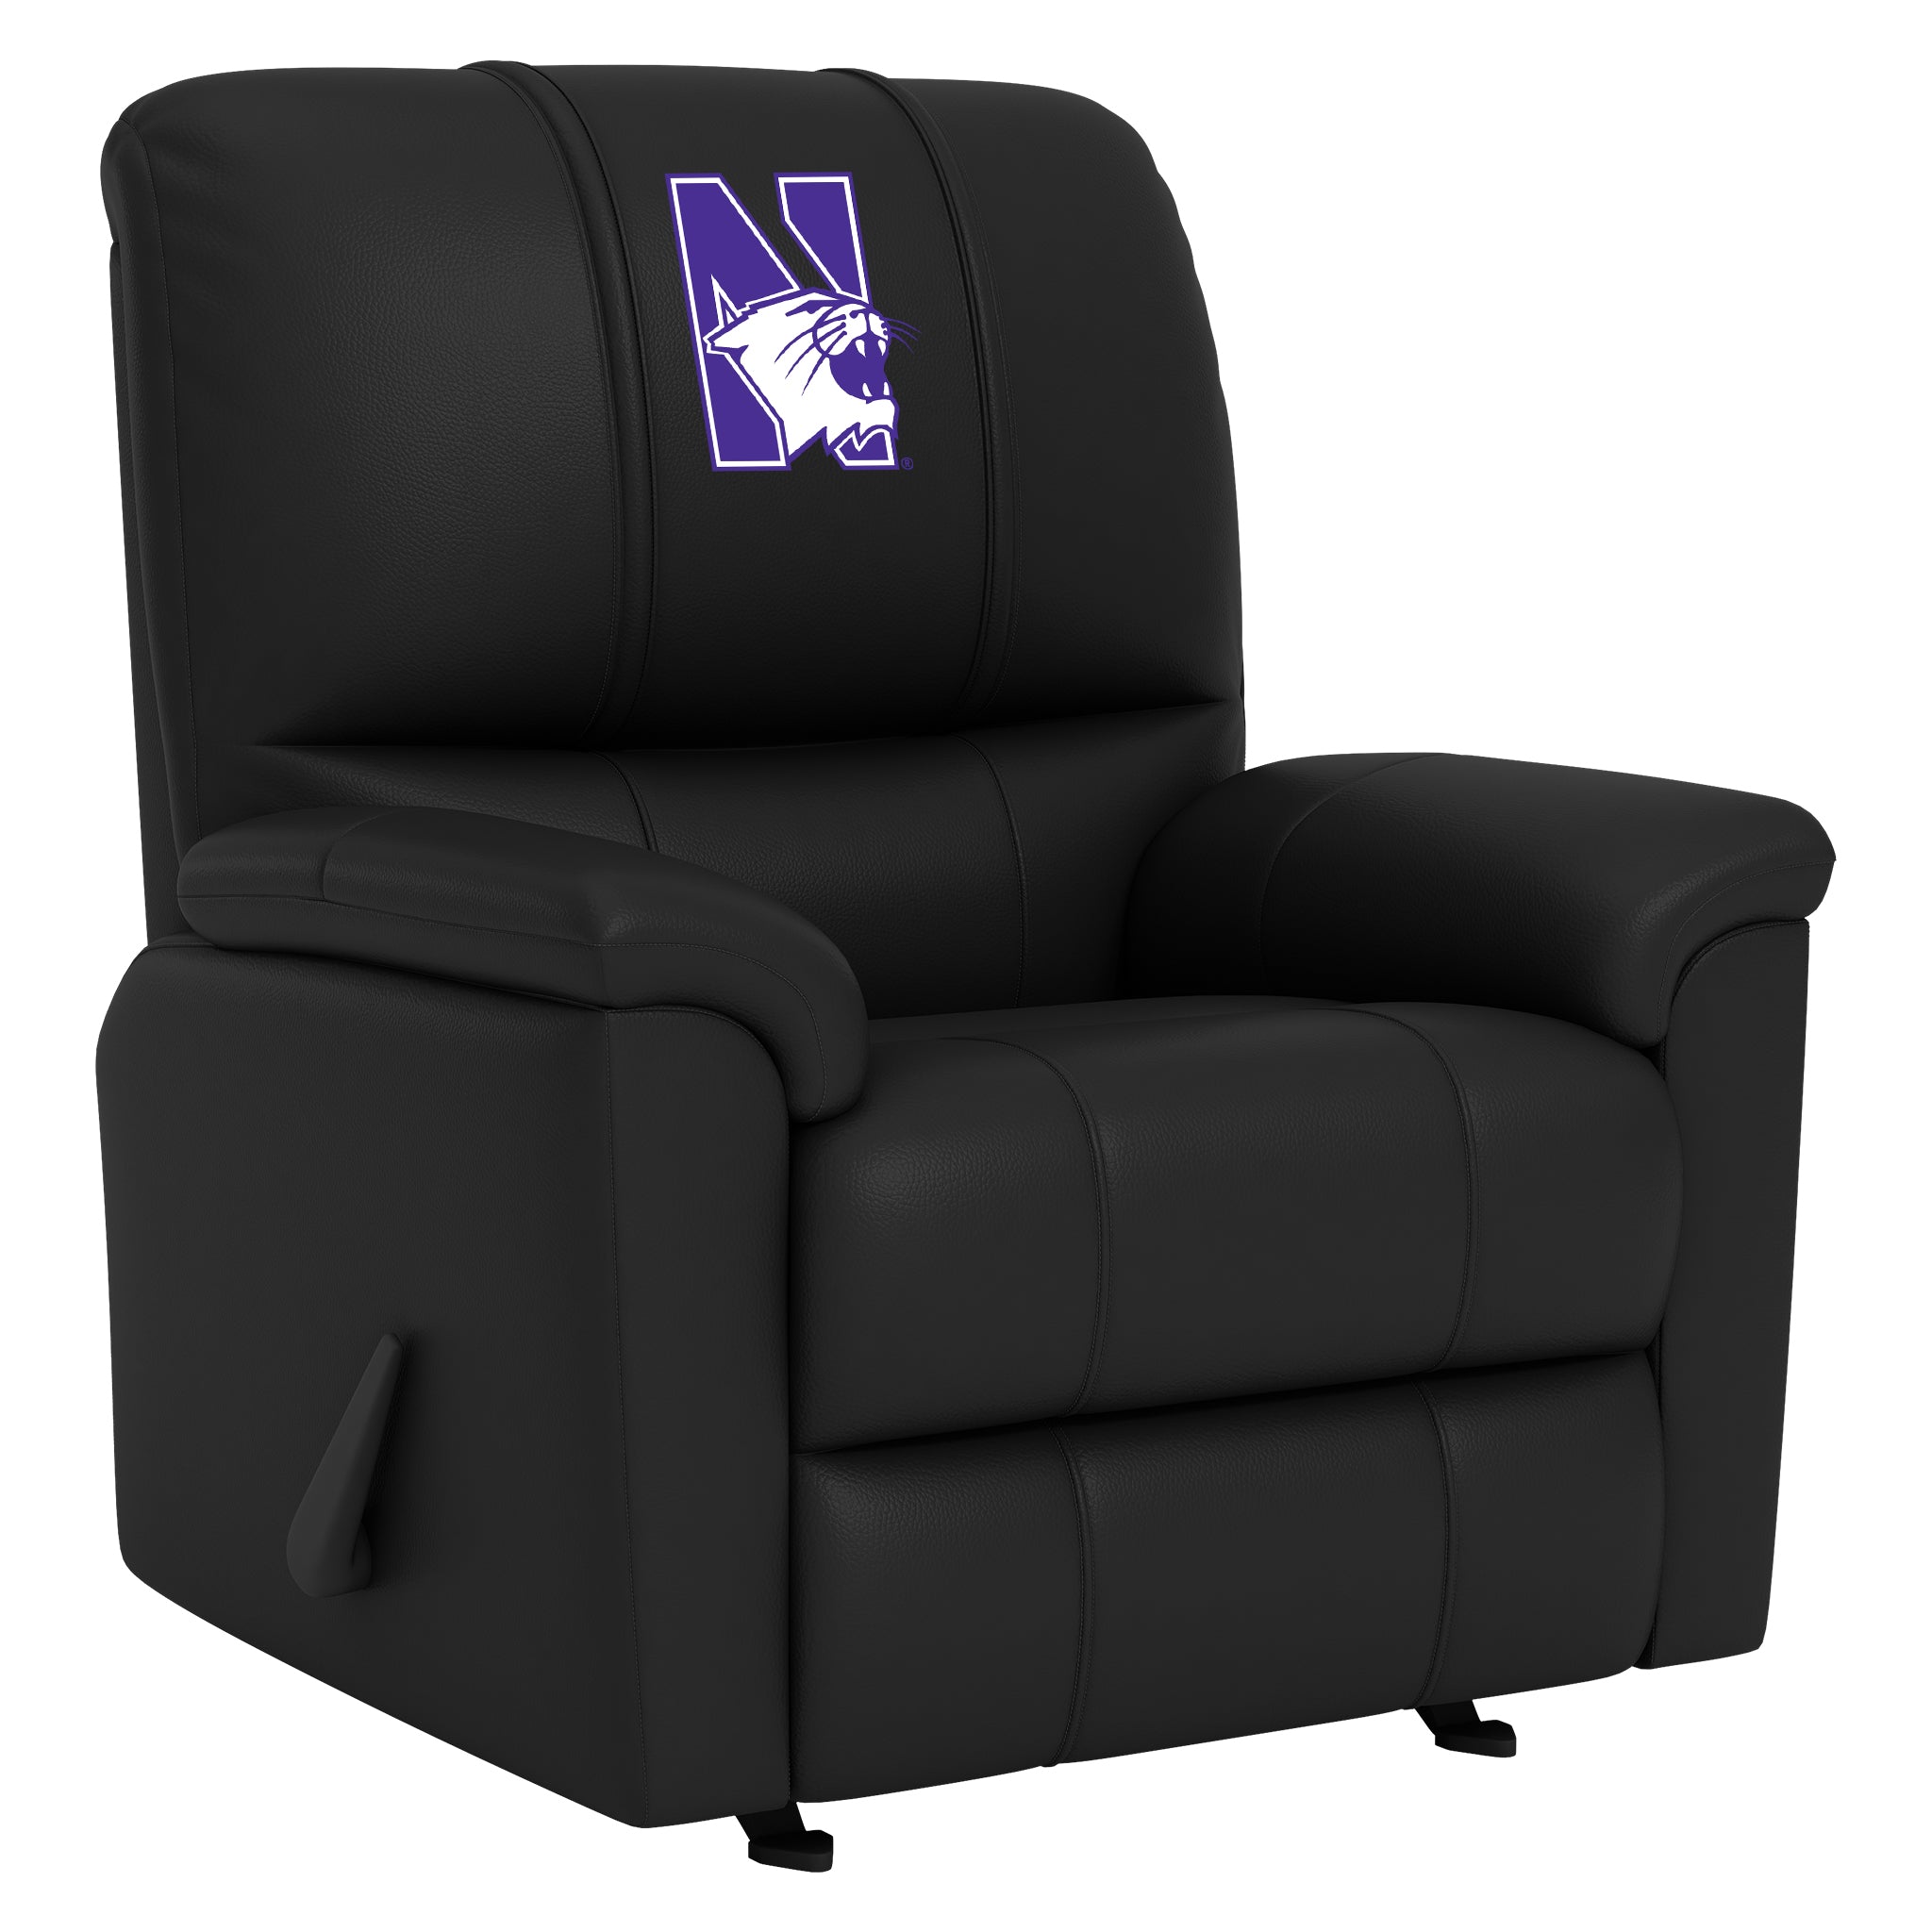 Northwestern Wildcats Silver Club Chair with Northwestern Wildcats Logo